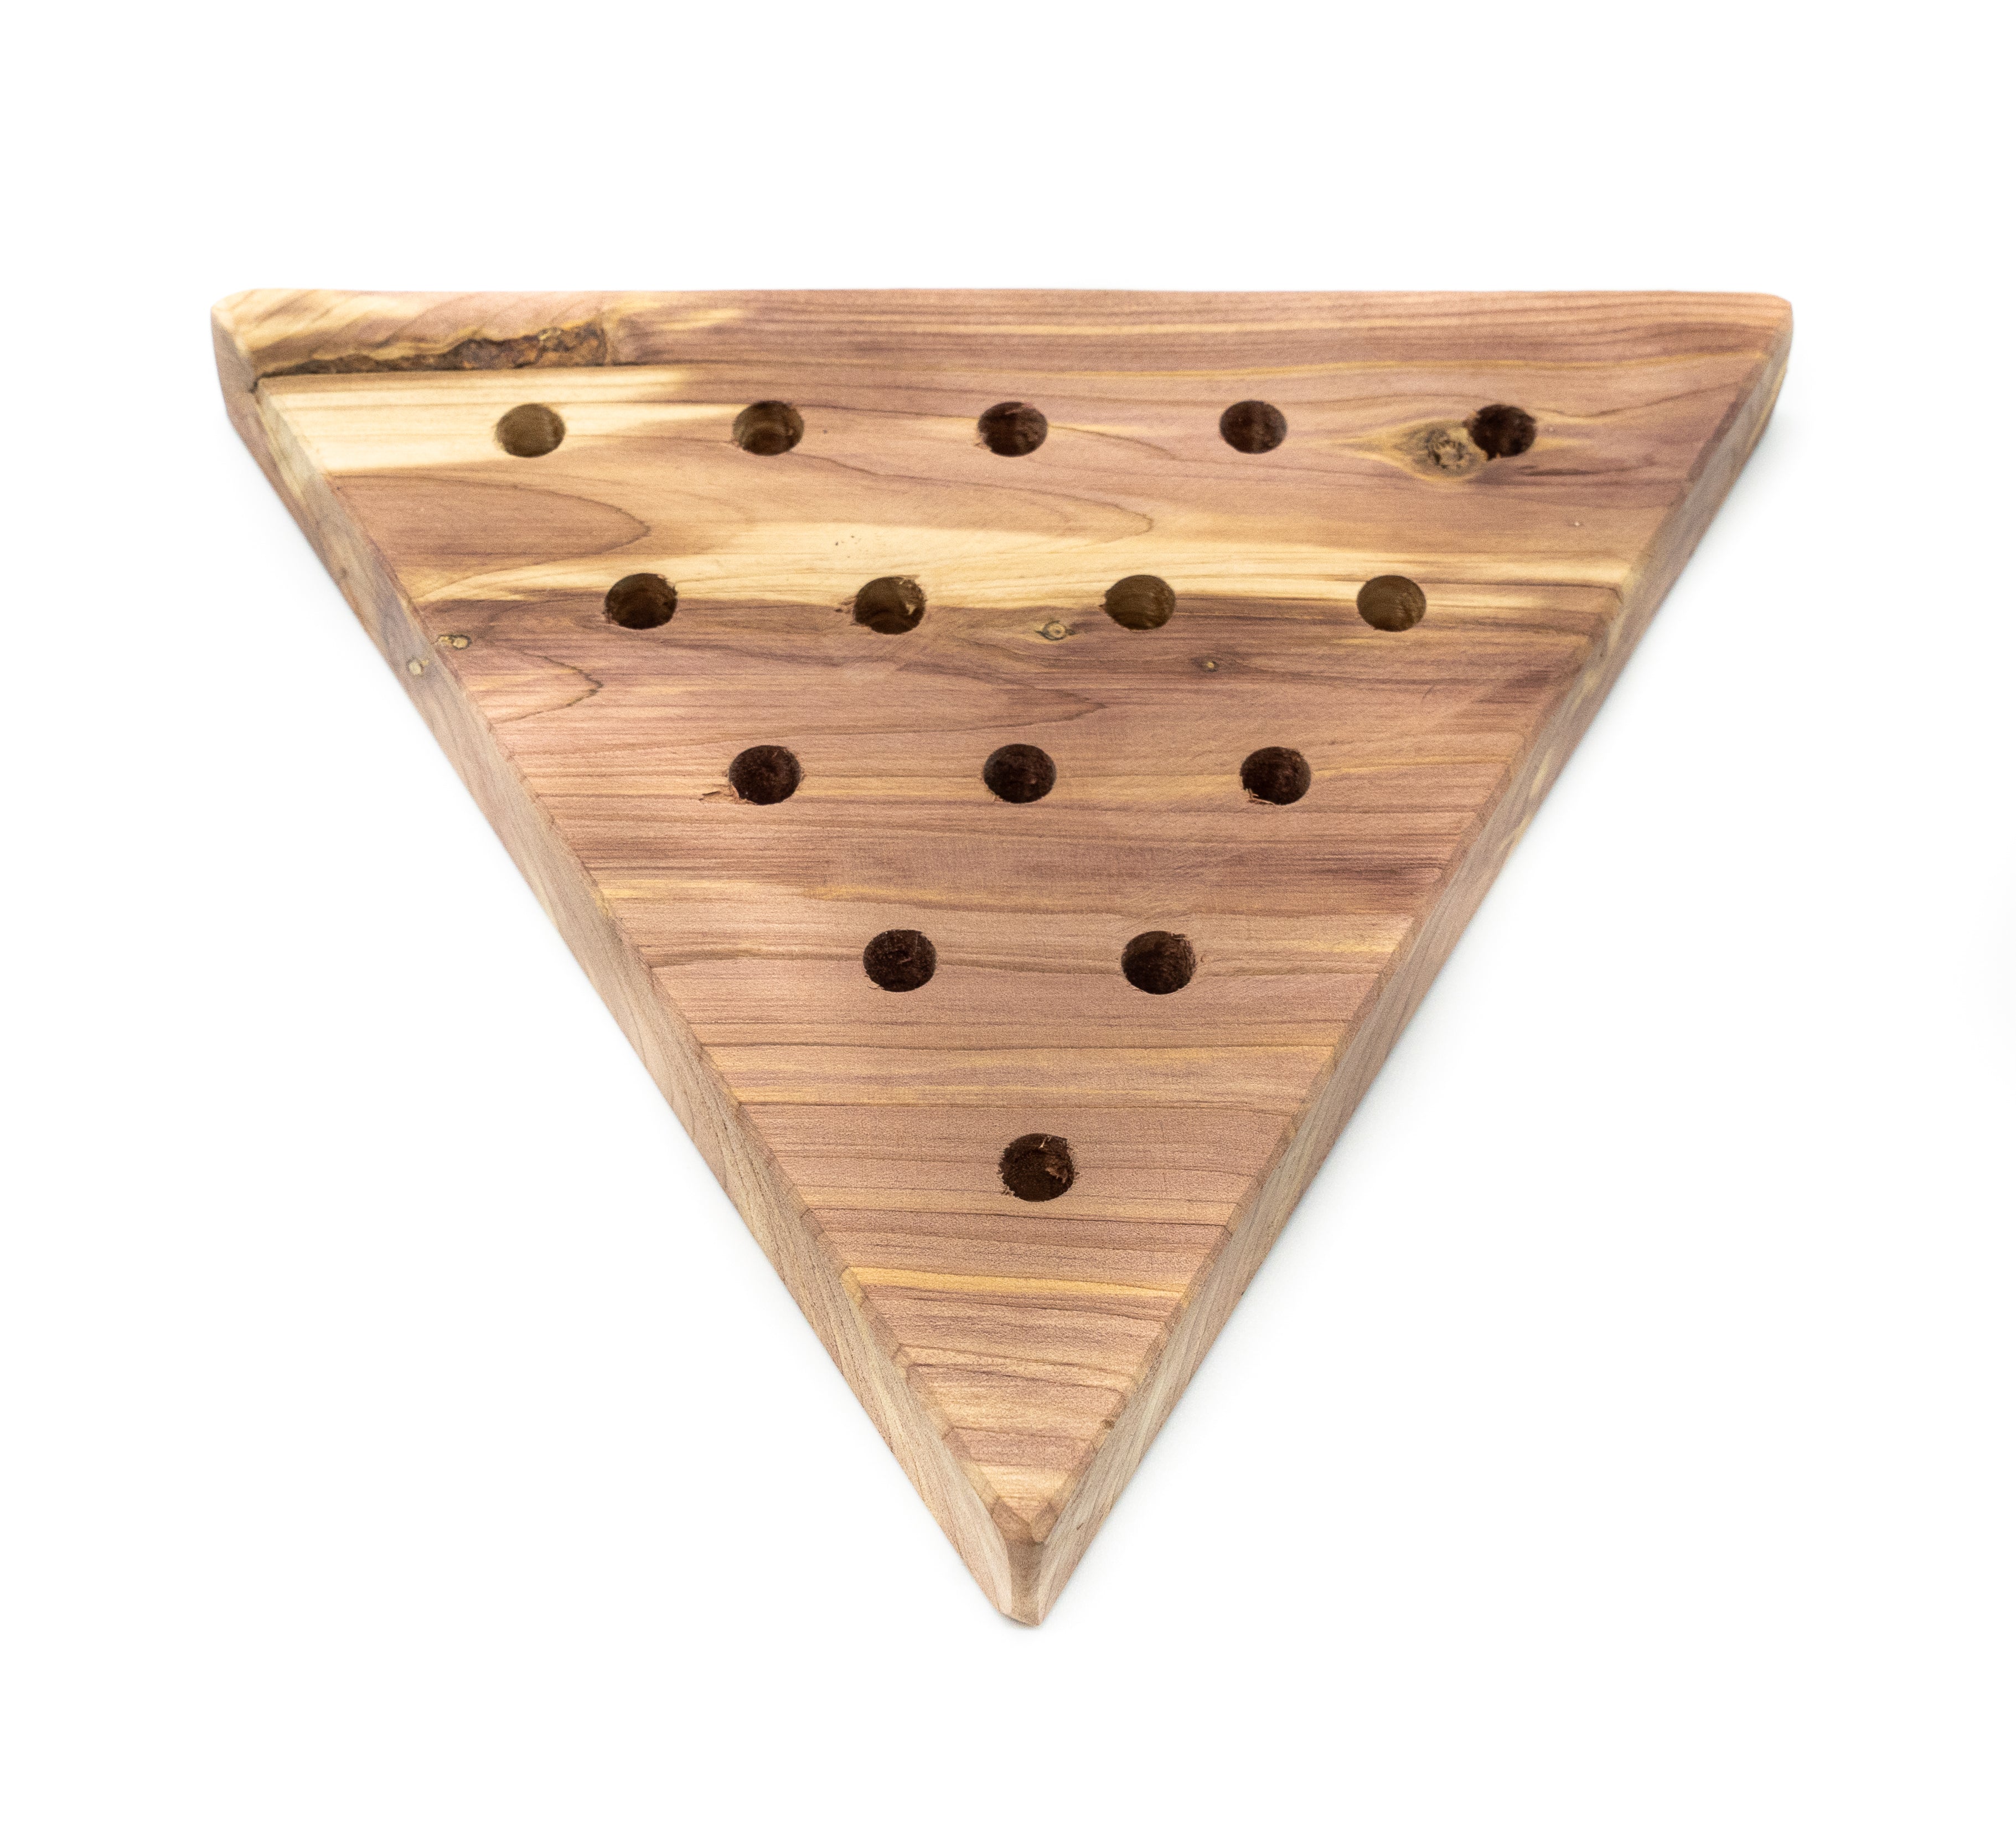 Triangle Peg Game Peg Solitaire Game Wood Peg Board Game -  Portugal